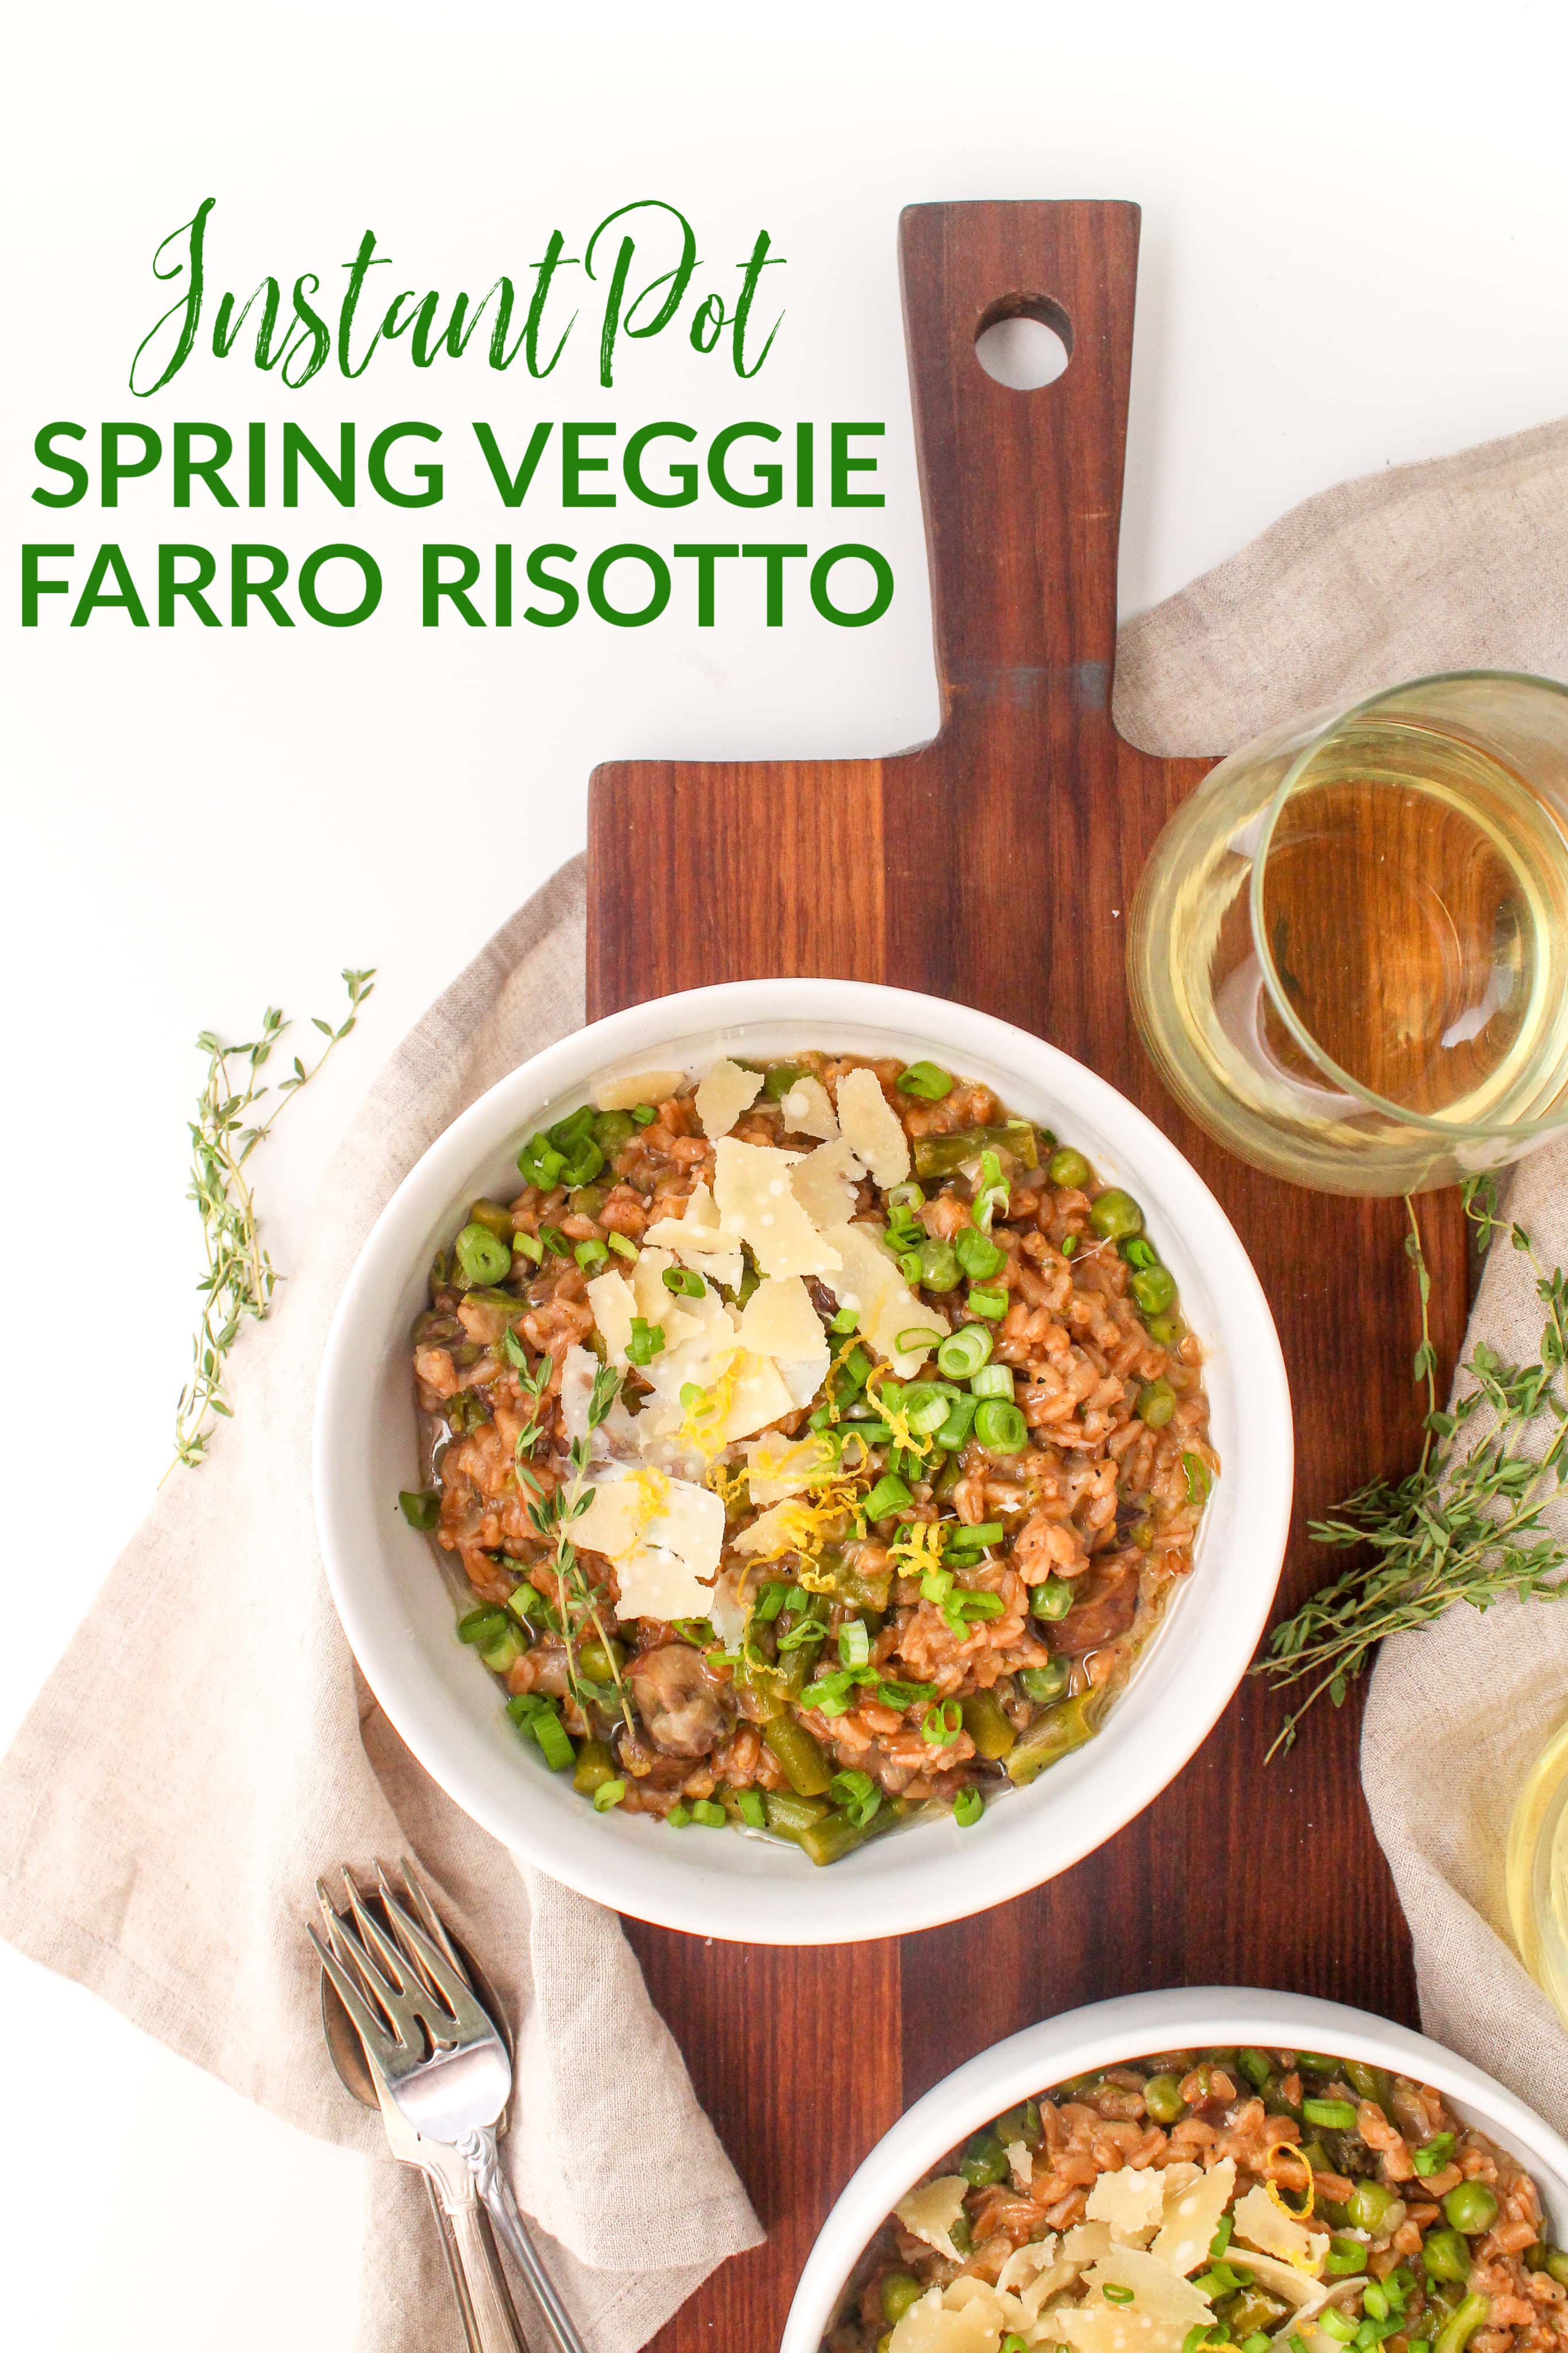 Healthy Instant Pot Risotto Recipe | Made with Farro + Spring Veggies